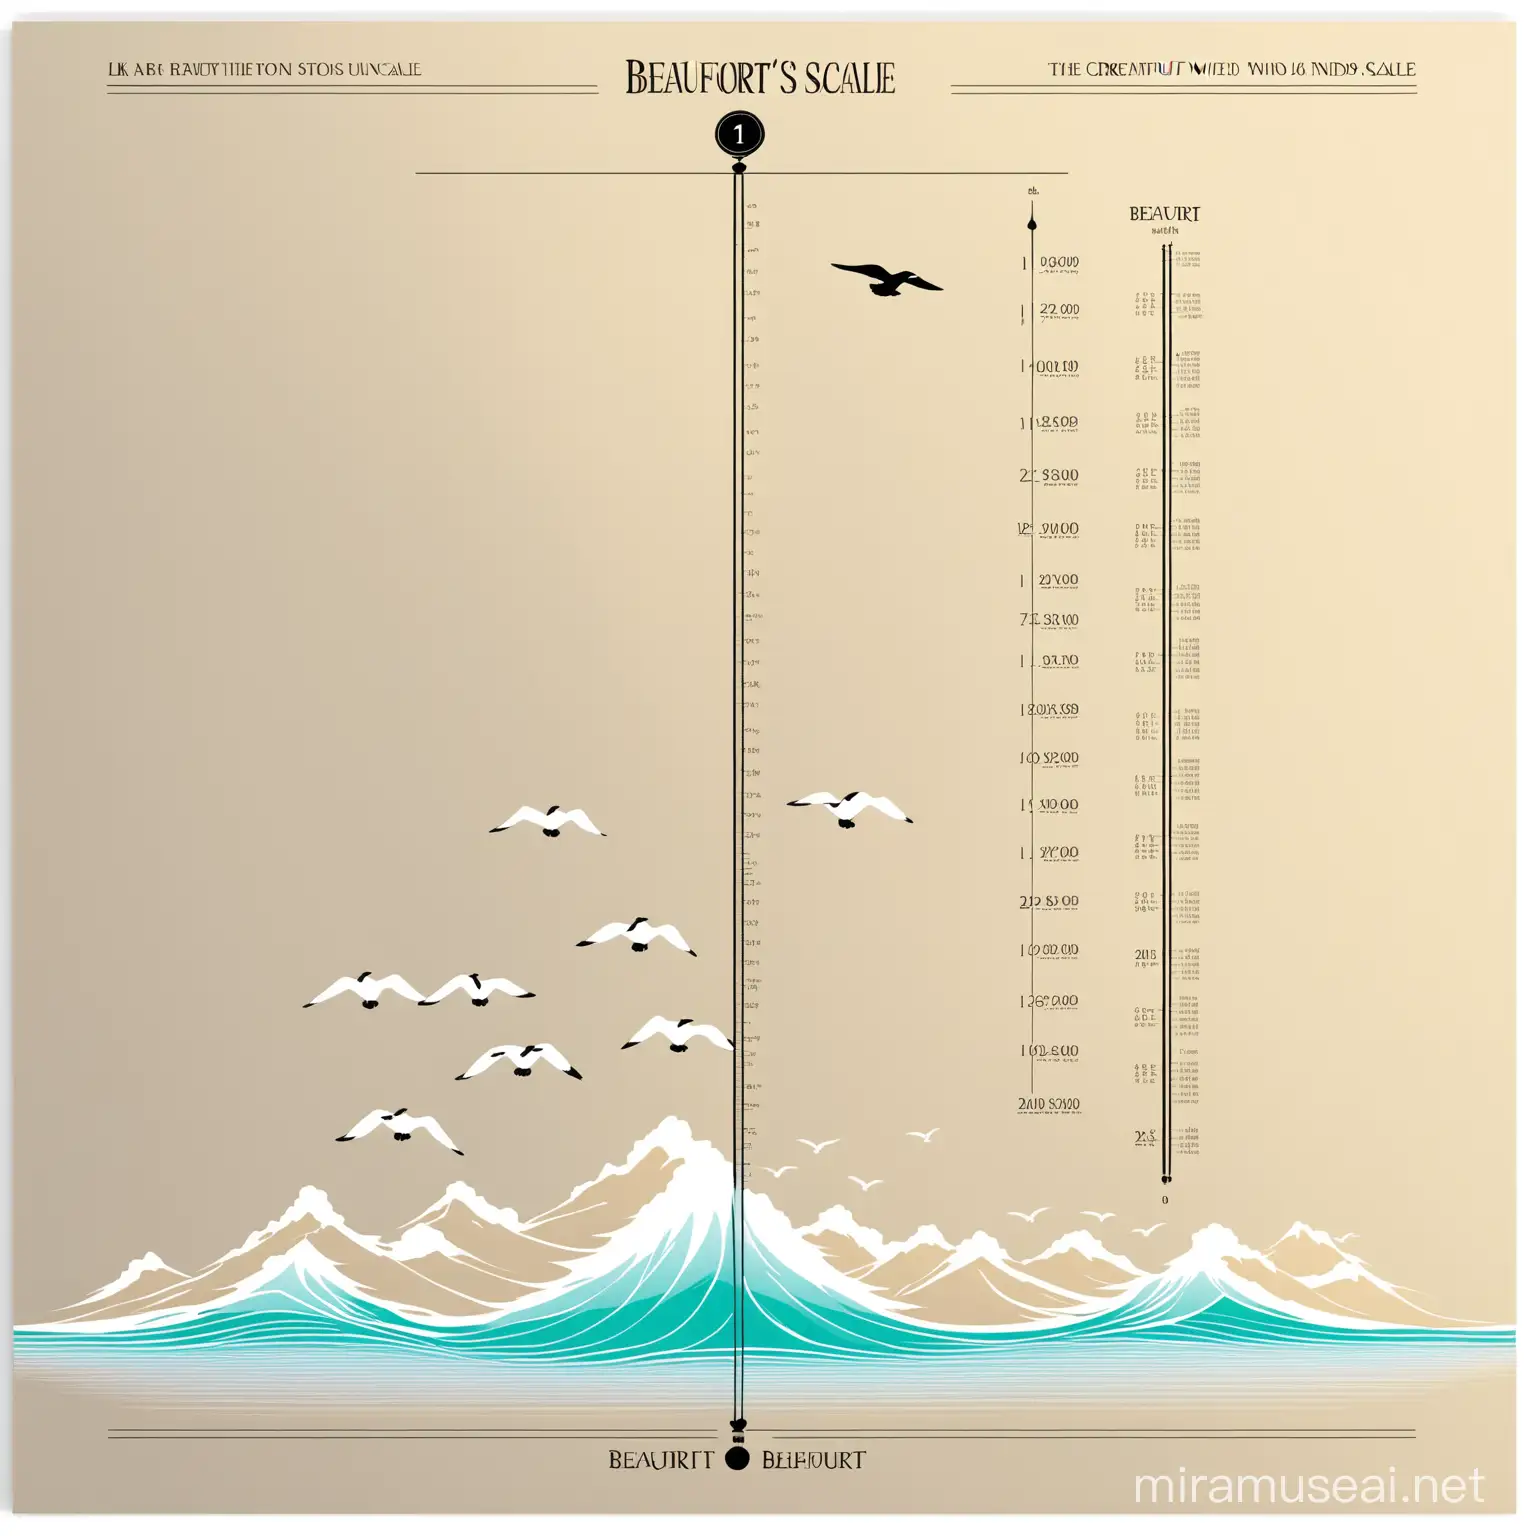 I would like a design for a one-off poster which creatively presents the Beaufort wind scale. Poster will be either A2 or A1 size in portrait orientation and printed in high gloss.

I’d like the poster to incorporate the Beaufort numbers, wind speeds and descriptions of the effects of the wind from the Beaufort scale. A simple and elegant design is preferred, ideally colourful, but I’m open to ideas. Graphics at the designer’s discretion.

I’d like there to be a very subtle inclusion of flying geese somewhere in the graphics. Most likely presented as shadows and subtle.
